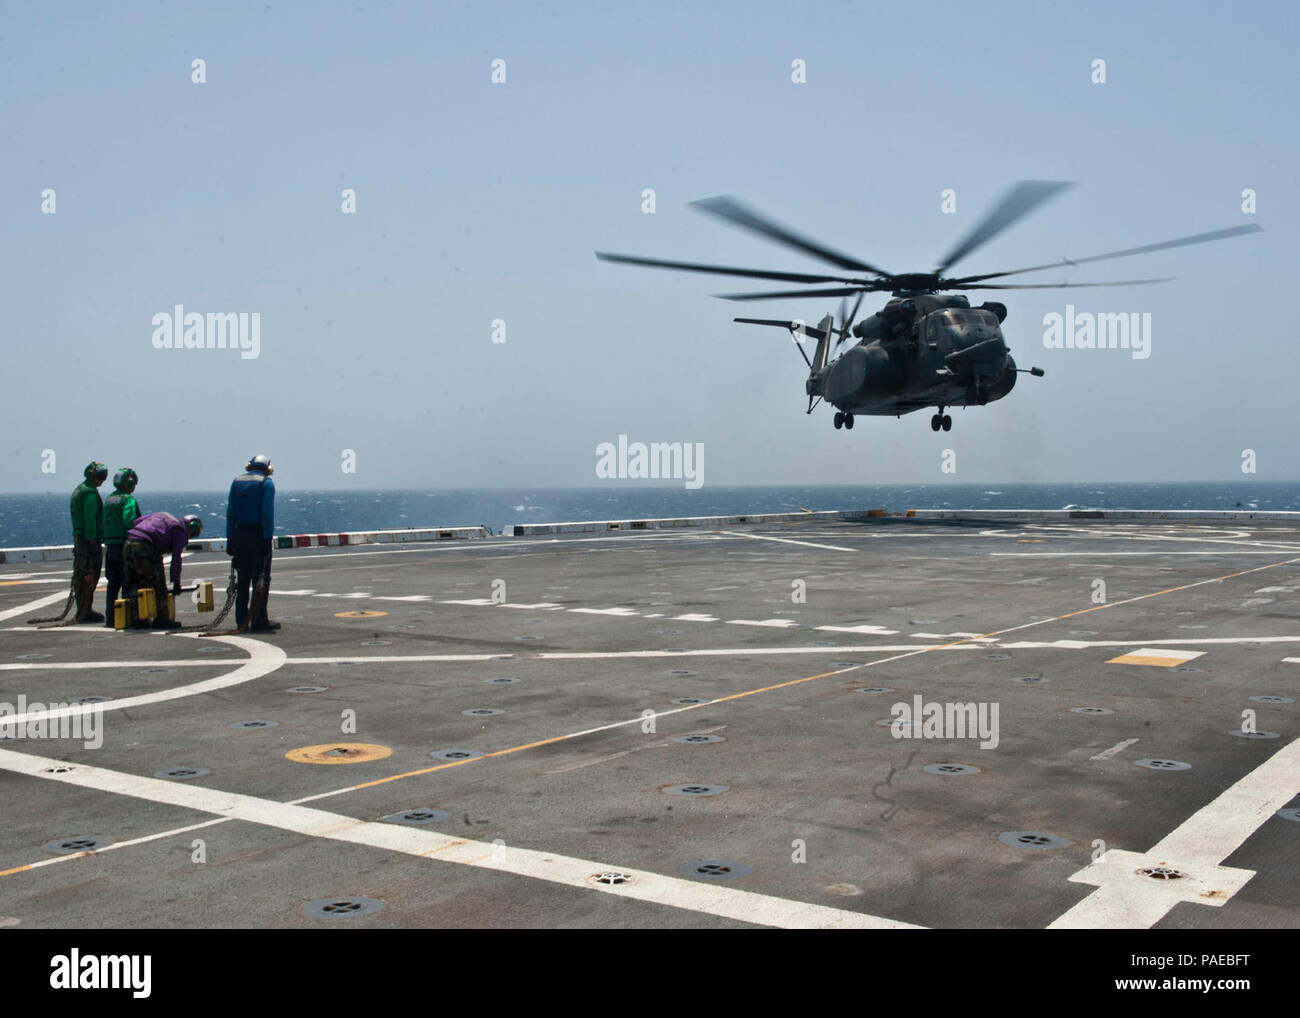 ARABIAN SEA (July 5, 2012) - U.S. Navy Sailors stand-by as an MH-53E Sea Dragon helicopter to land aboard amphibious transport dock ship USS New York (LPD 21). New York is part of the Iwo Jima Amphibious Ready Group with the embarked 24th Marine Expeditionary Unit and is currently deployed in support of maritime security operations and theater security cooperation efforts in the U.S. 5th Fleet area of responsibility. Stock Photo